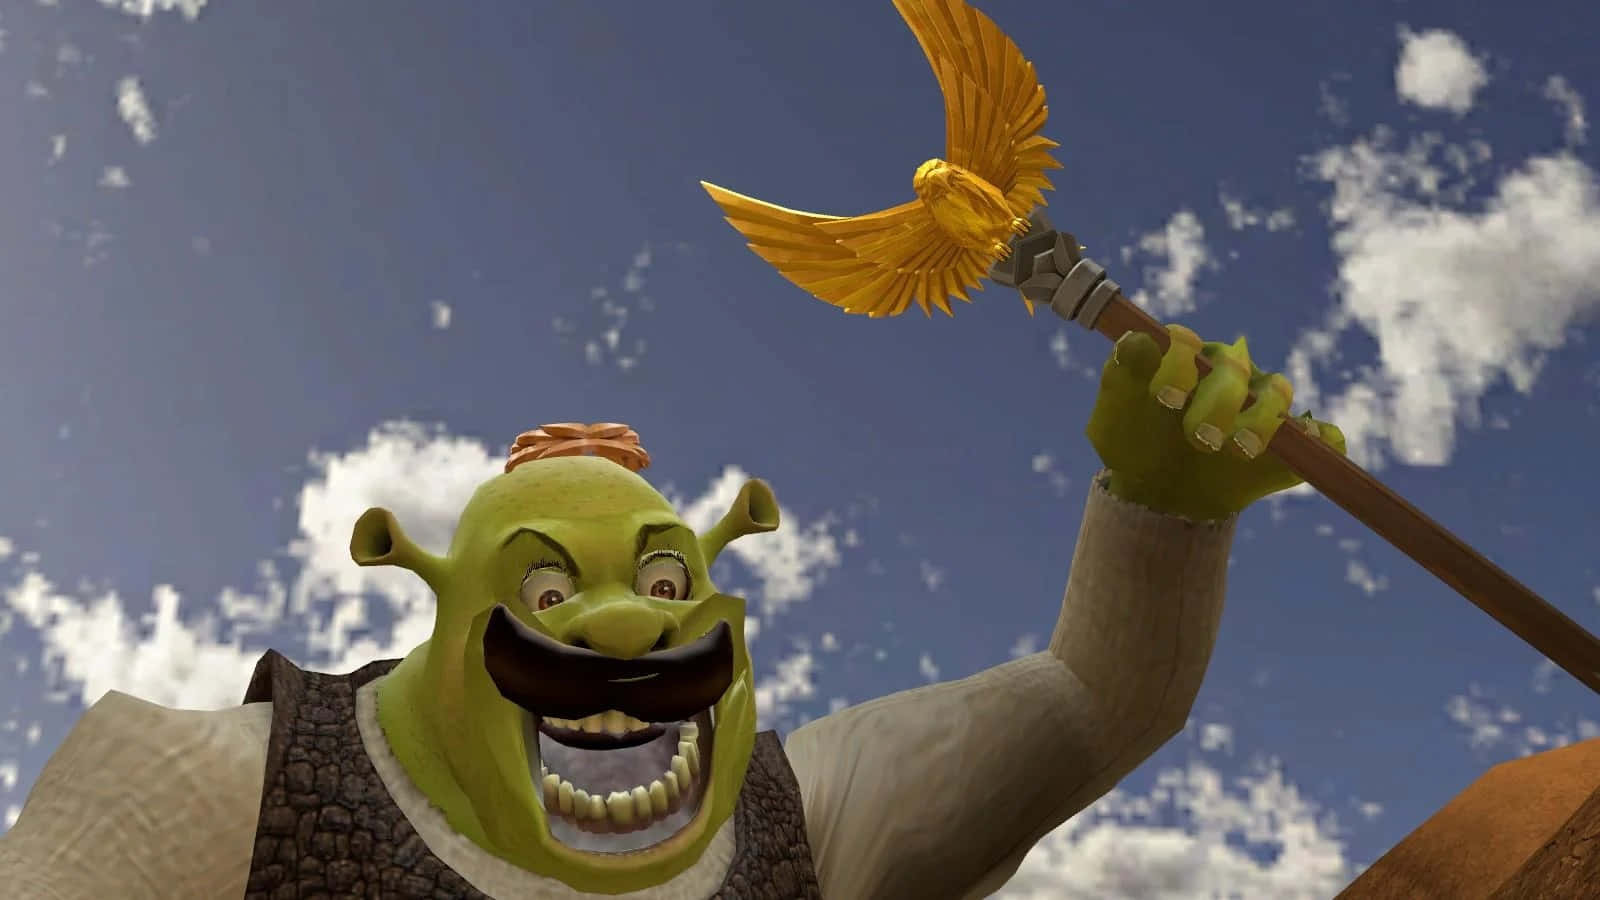 Bring out the ogre in you!